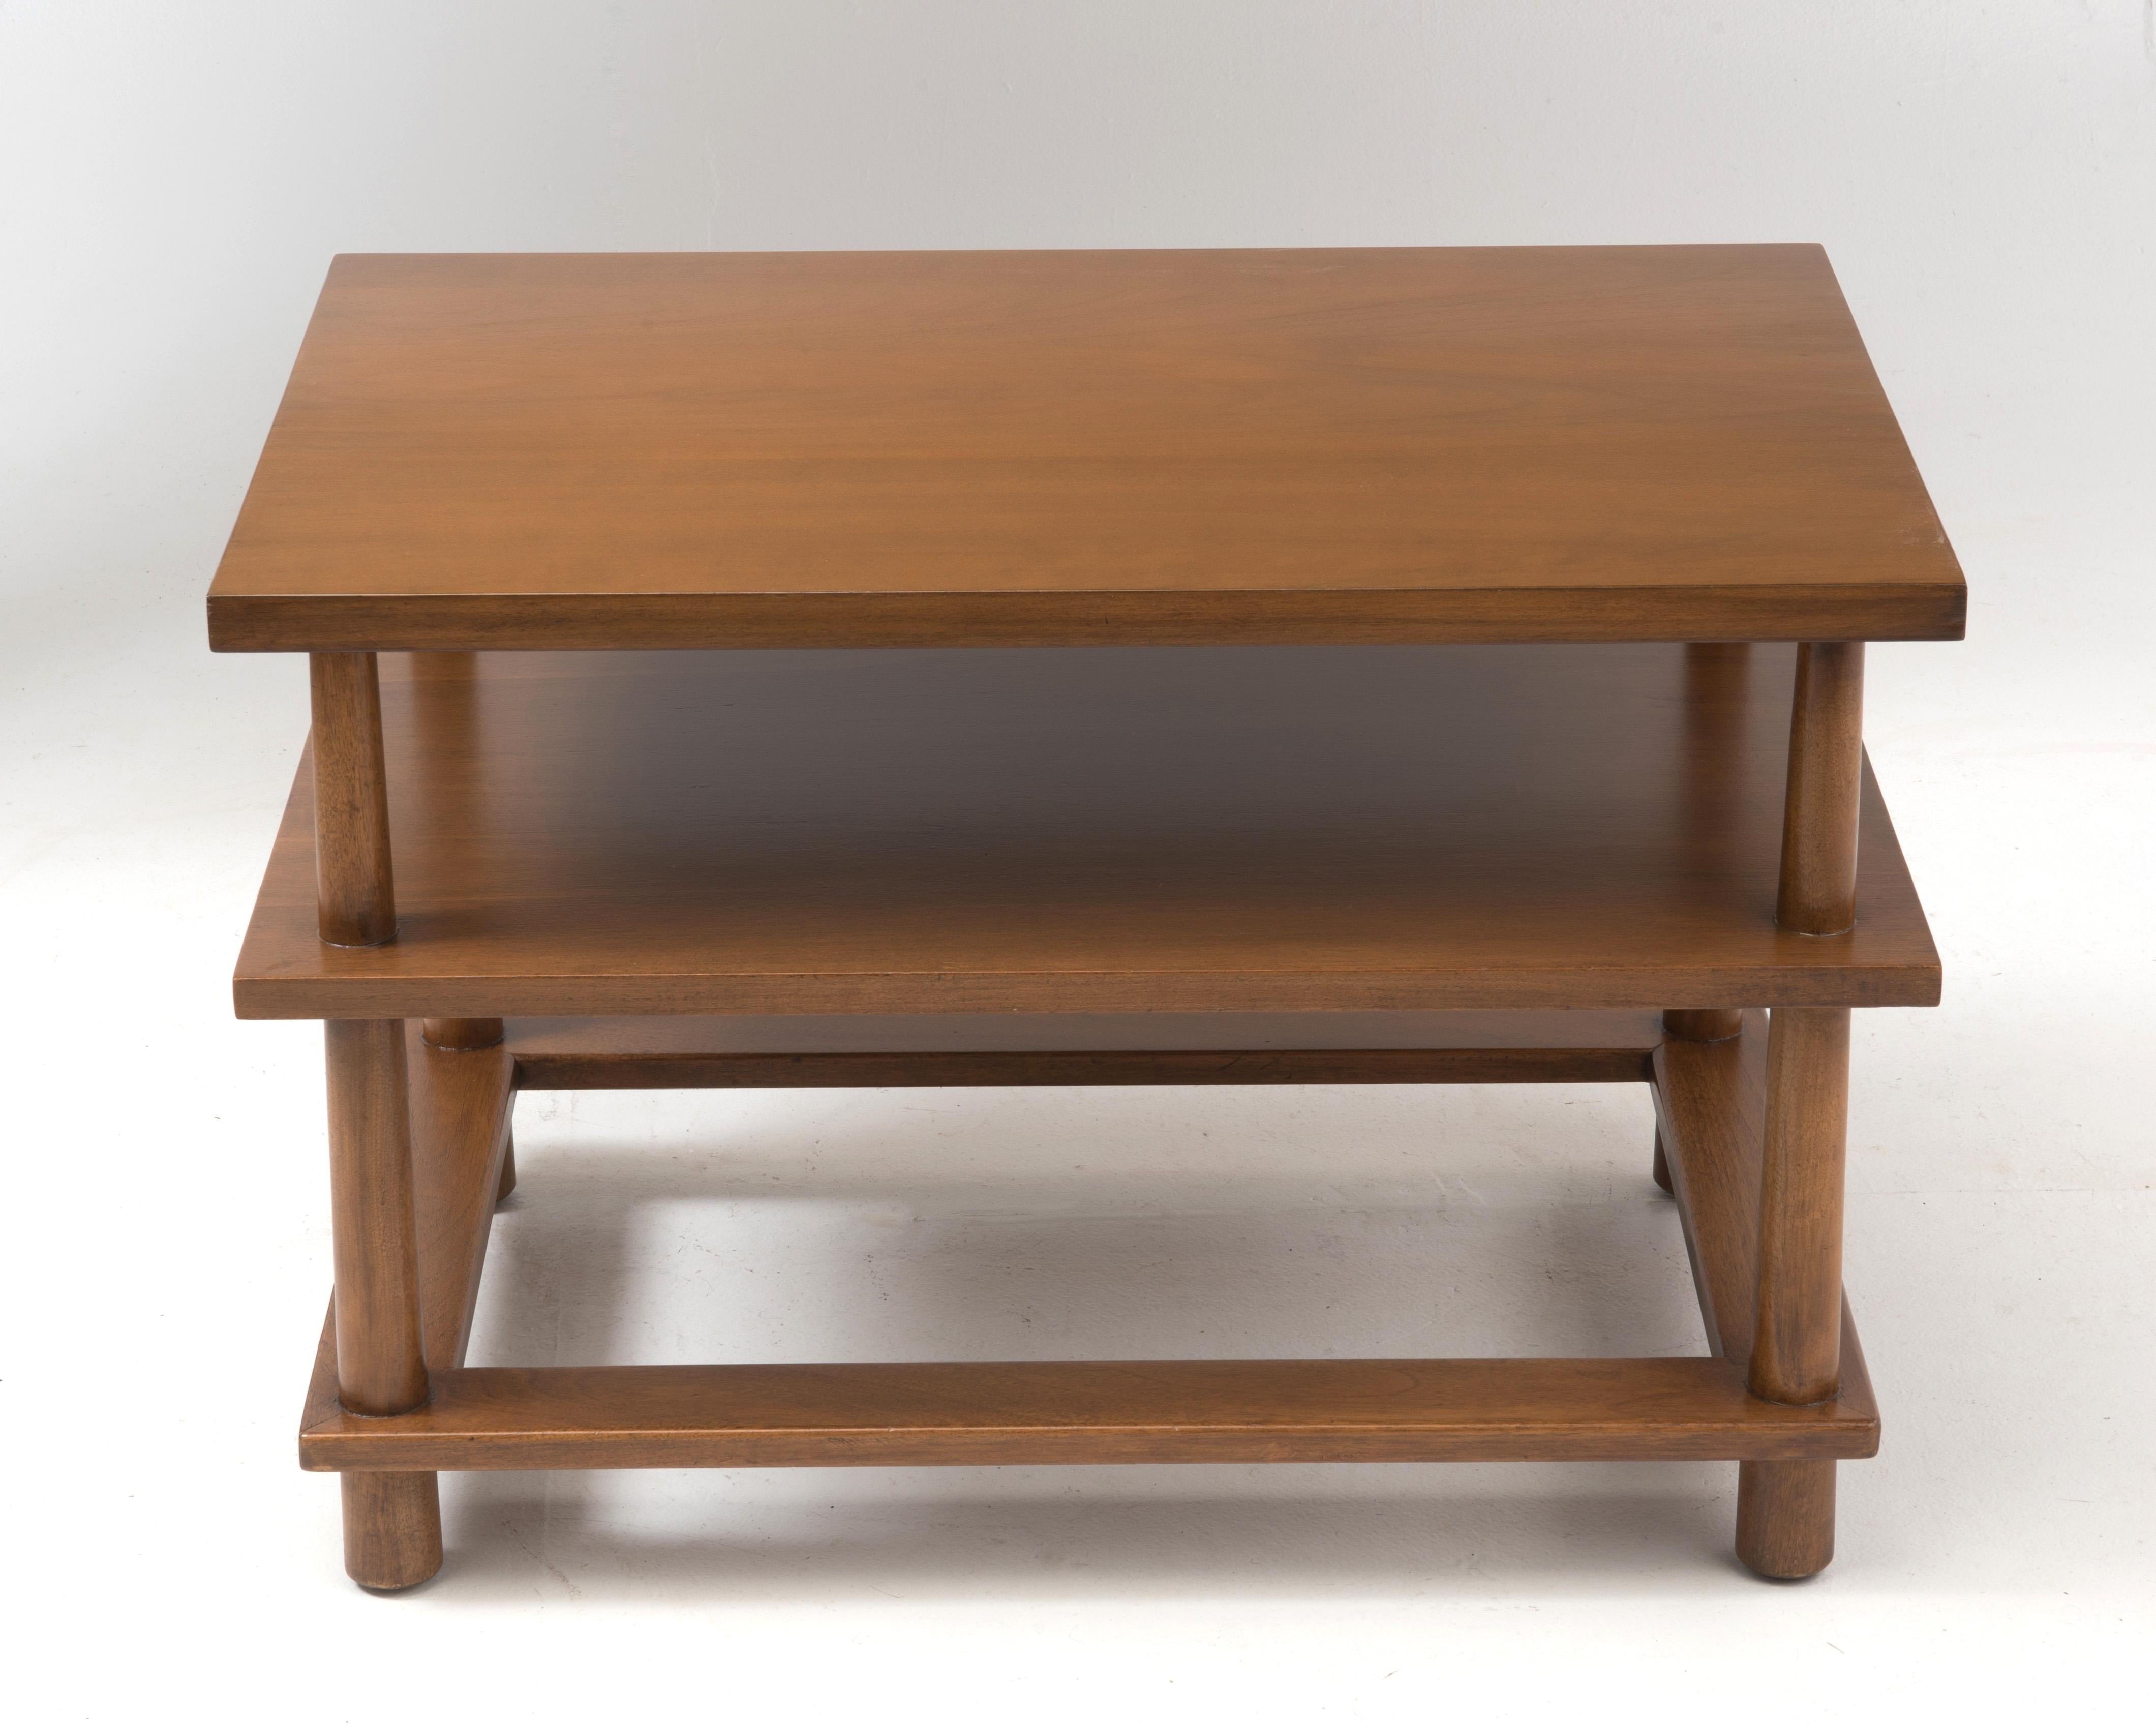 A restored T.H. Robsjohn-Gibbings designed side table manufactured by Widdicomb in 1957. The tables feature beechwood reverse tapered legs and a walnut tabletop, middle shelf and bottom frame.